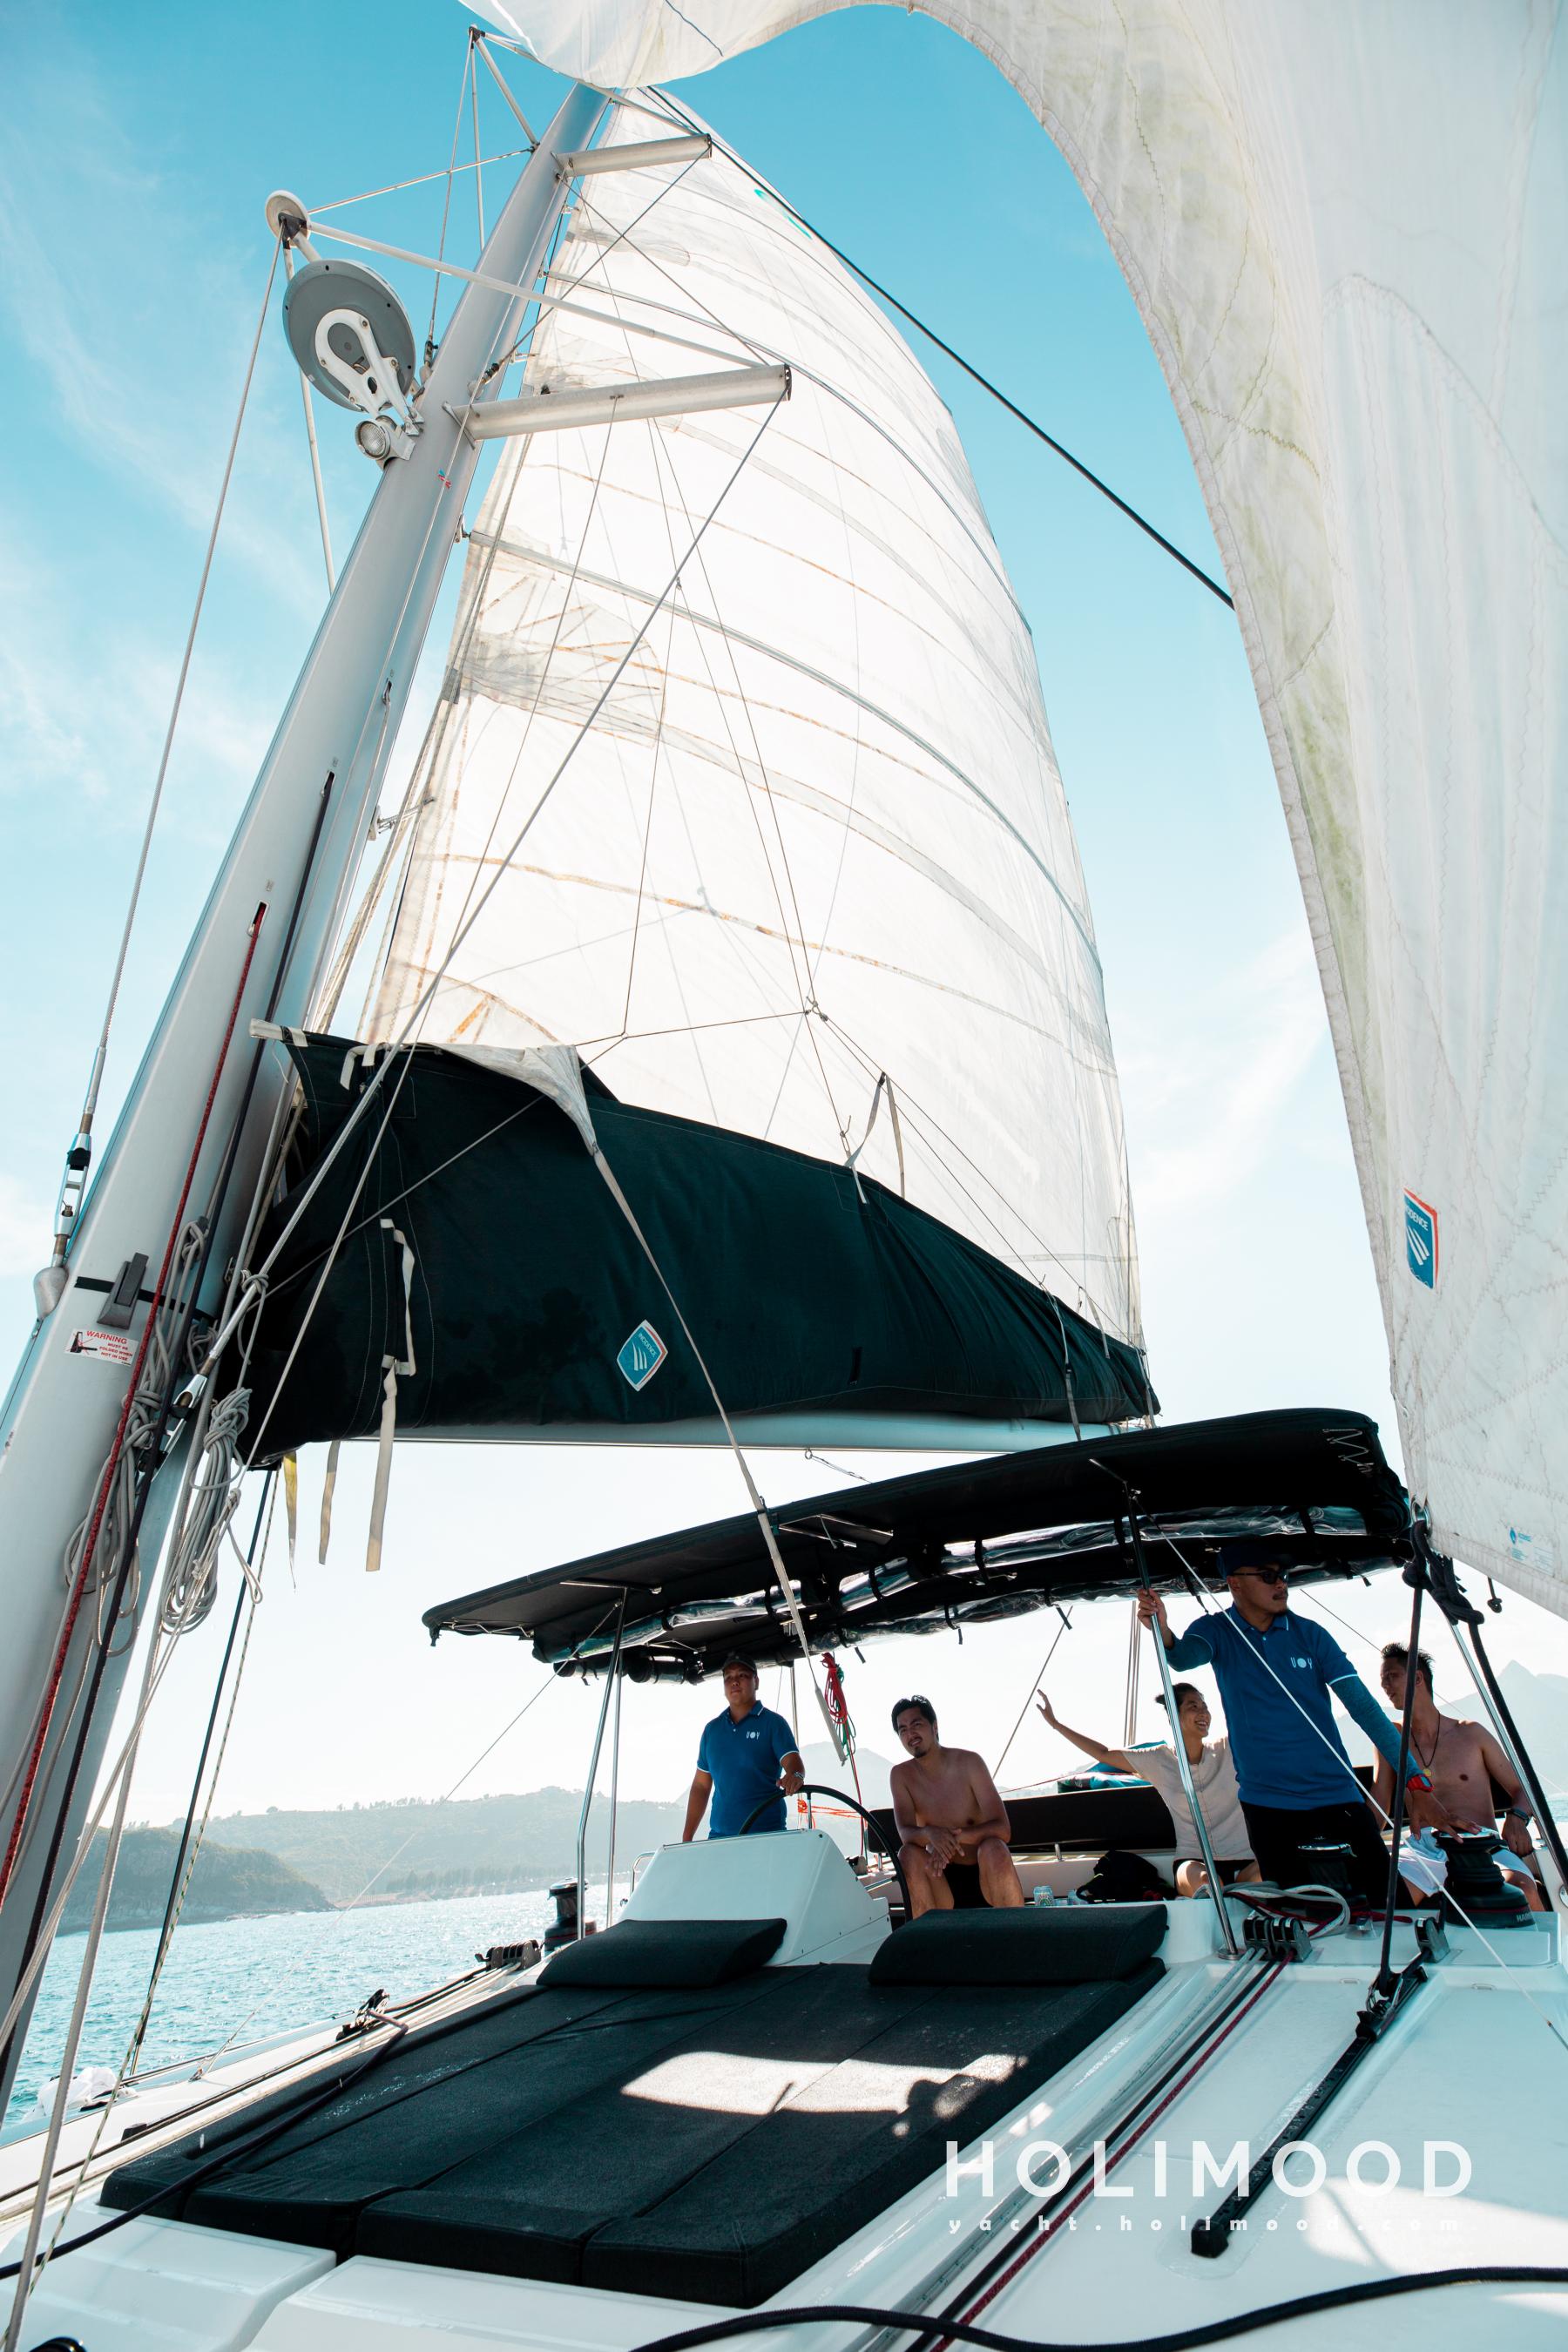 SL01 48-Hour Upgraded Luxury Catamaran Sailing Voyage, an unforgettable 3 days and 2 nights sea experience 14